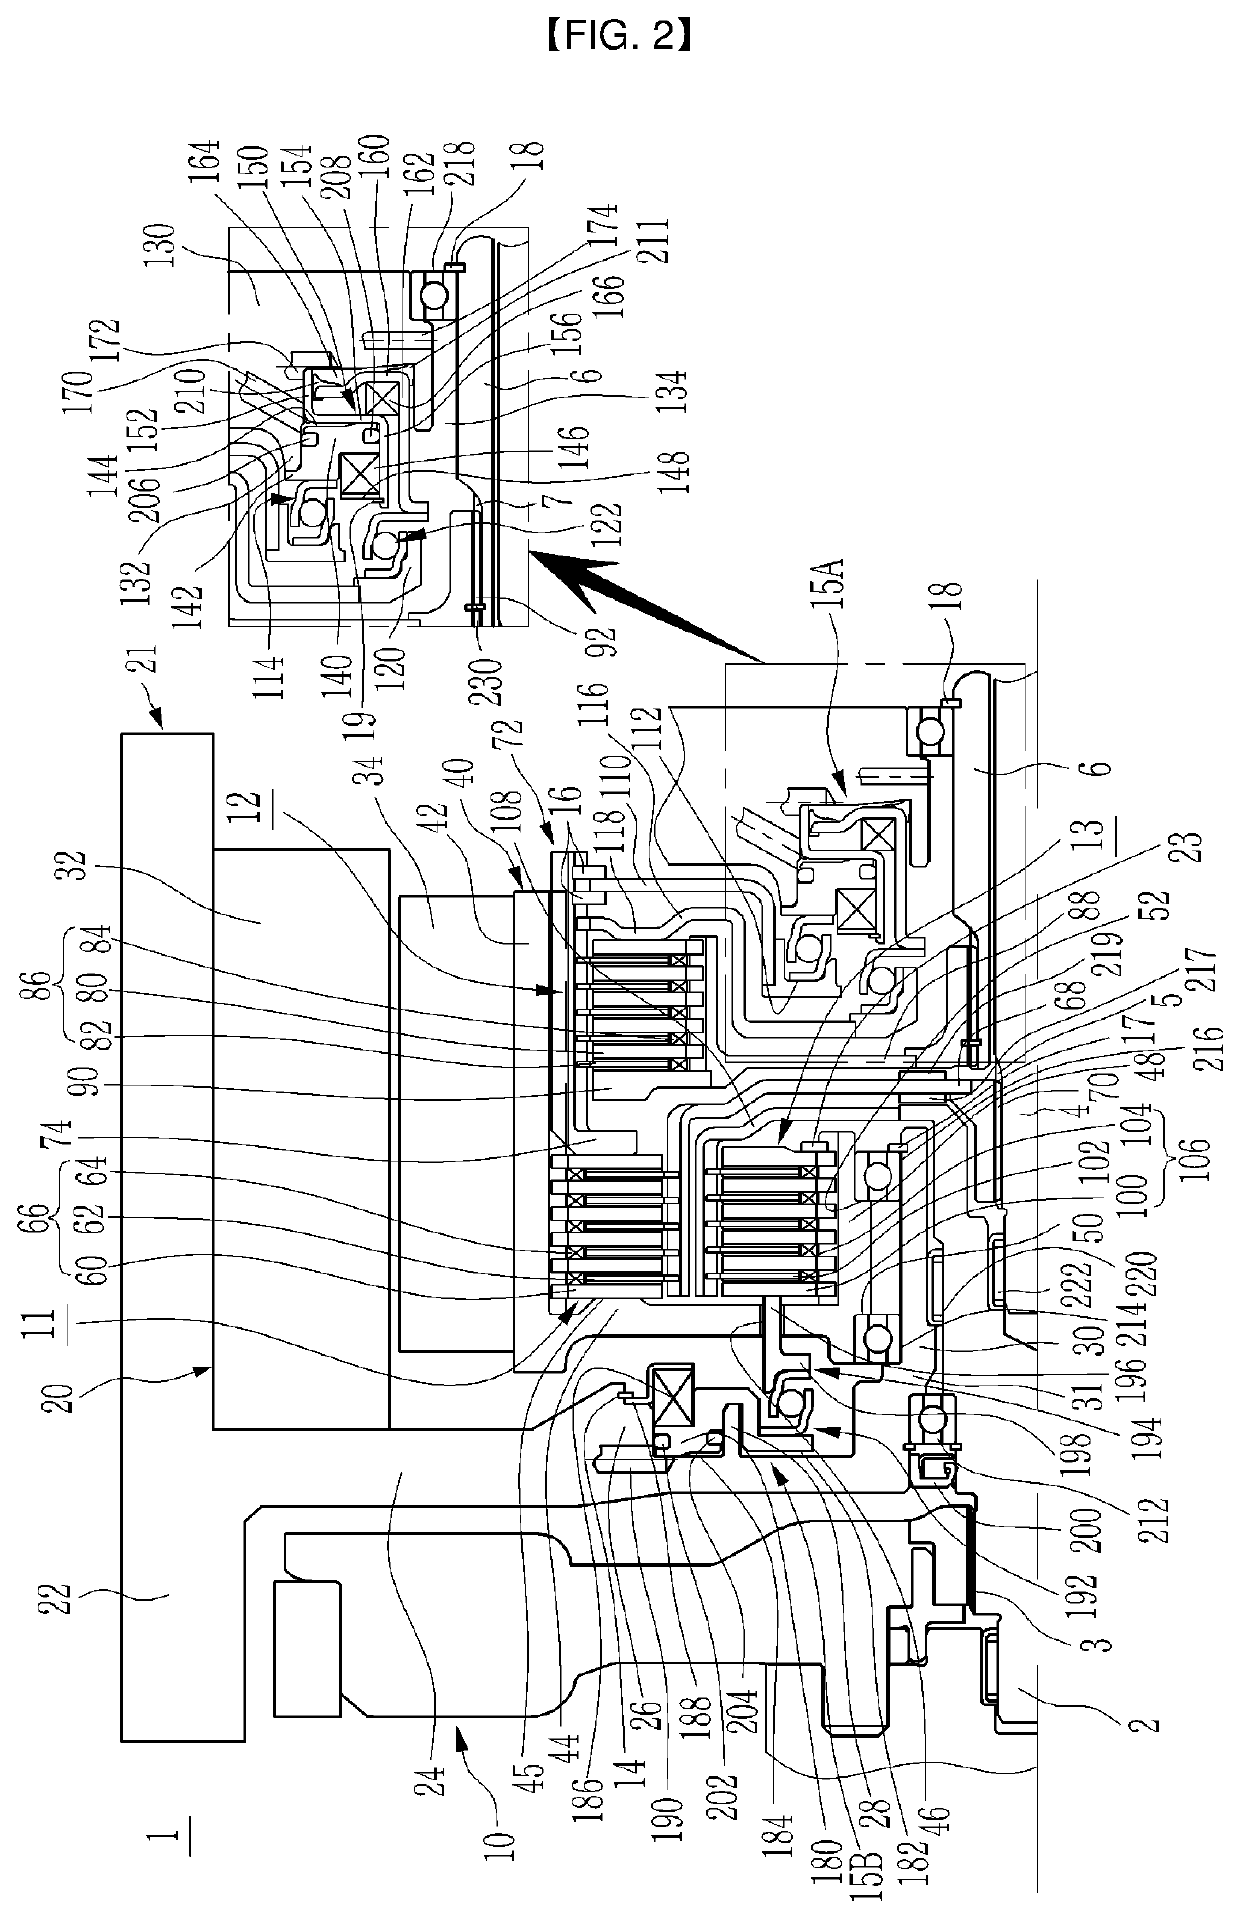 Triple clutch and actuator thereof